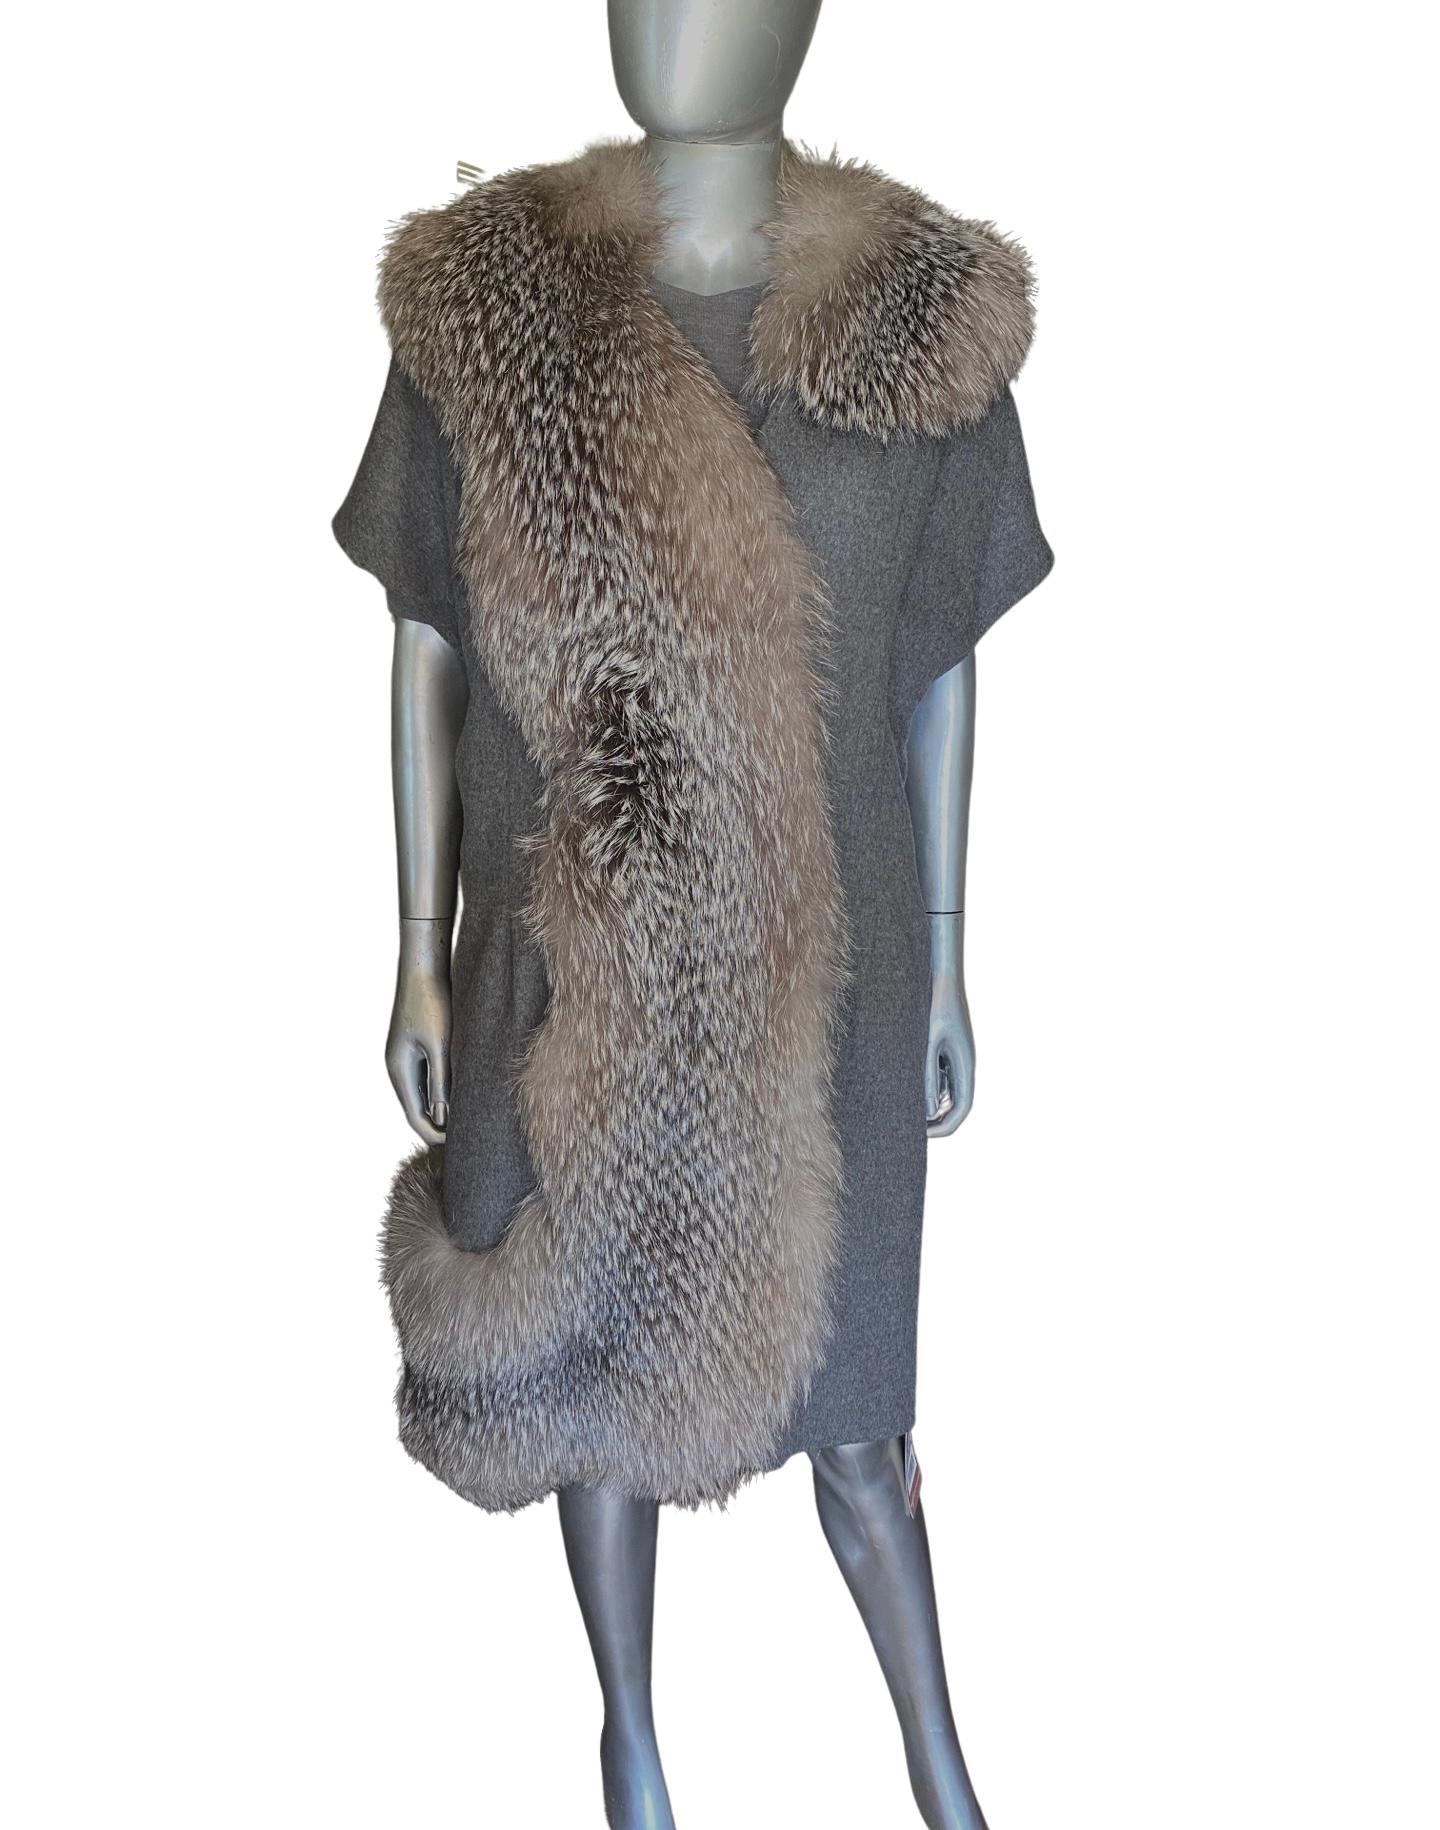 Vionnet Paris Cashmere and Fur Coat (NWT) w/ Addtl Dress & Trouser Set Size 8/10 In Good Condition For Sale In Palm Springs, CA